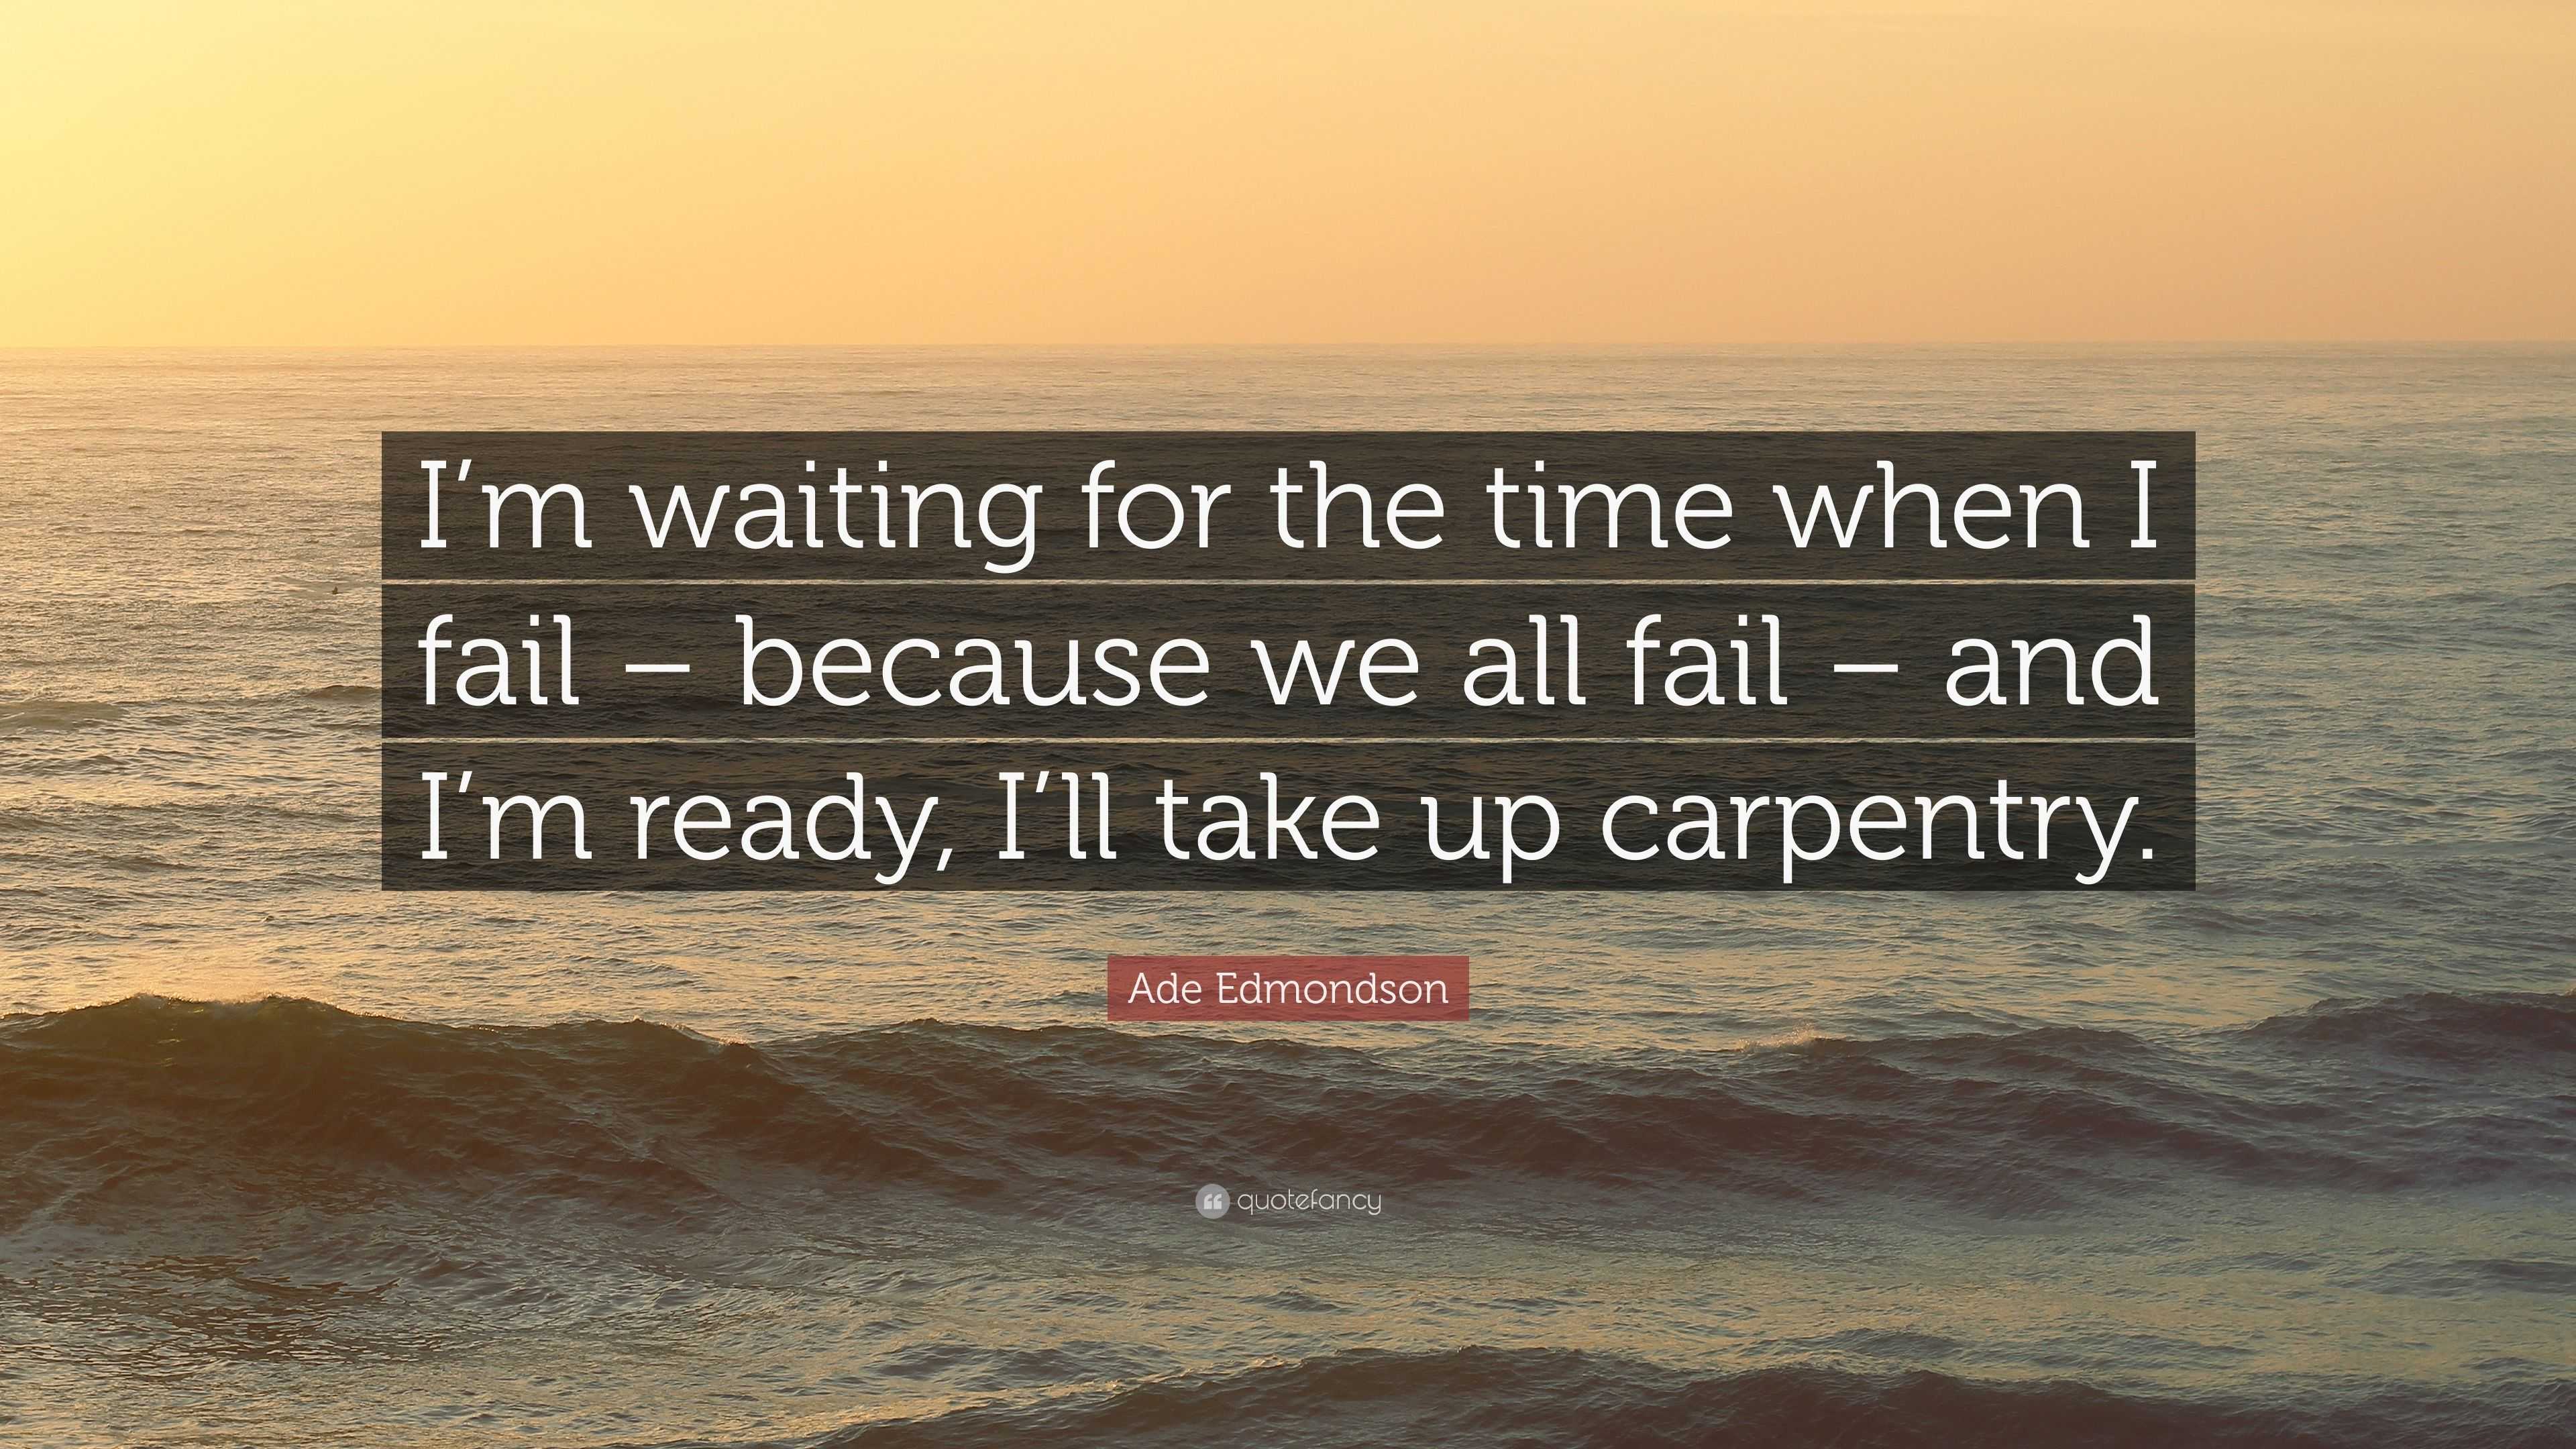 Ade Edmondson quote: I'm waiting for the time when I fail - because